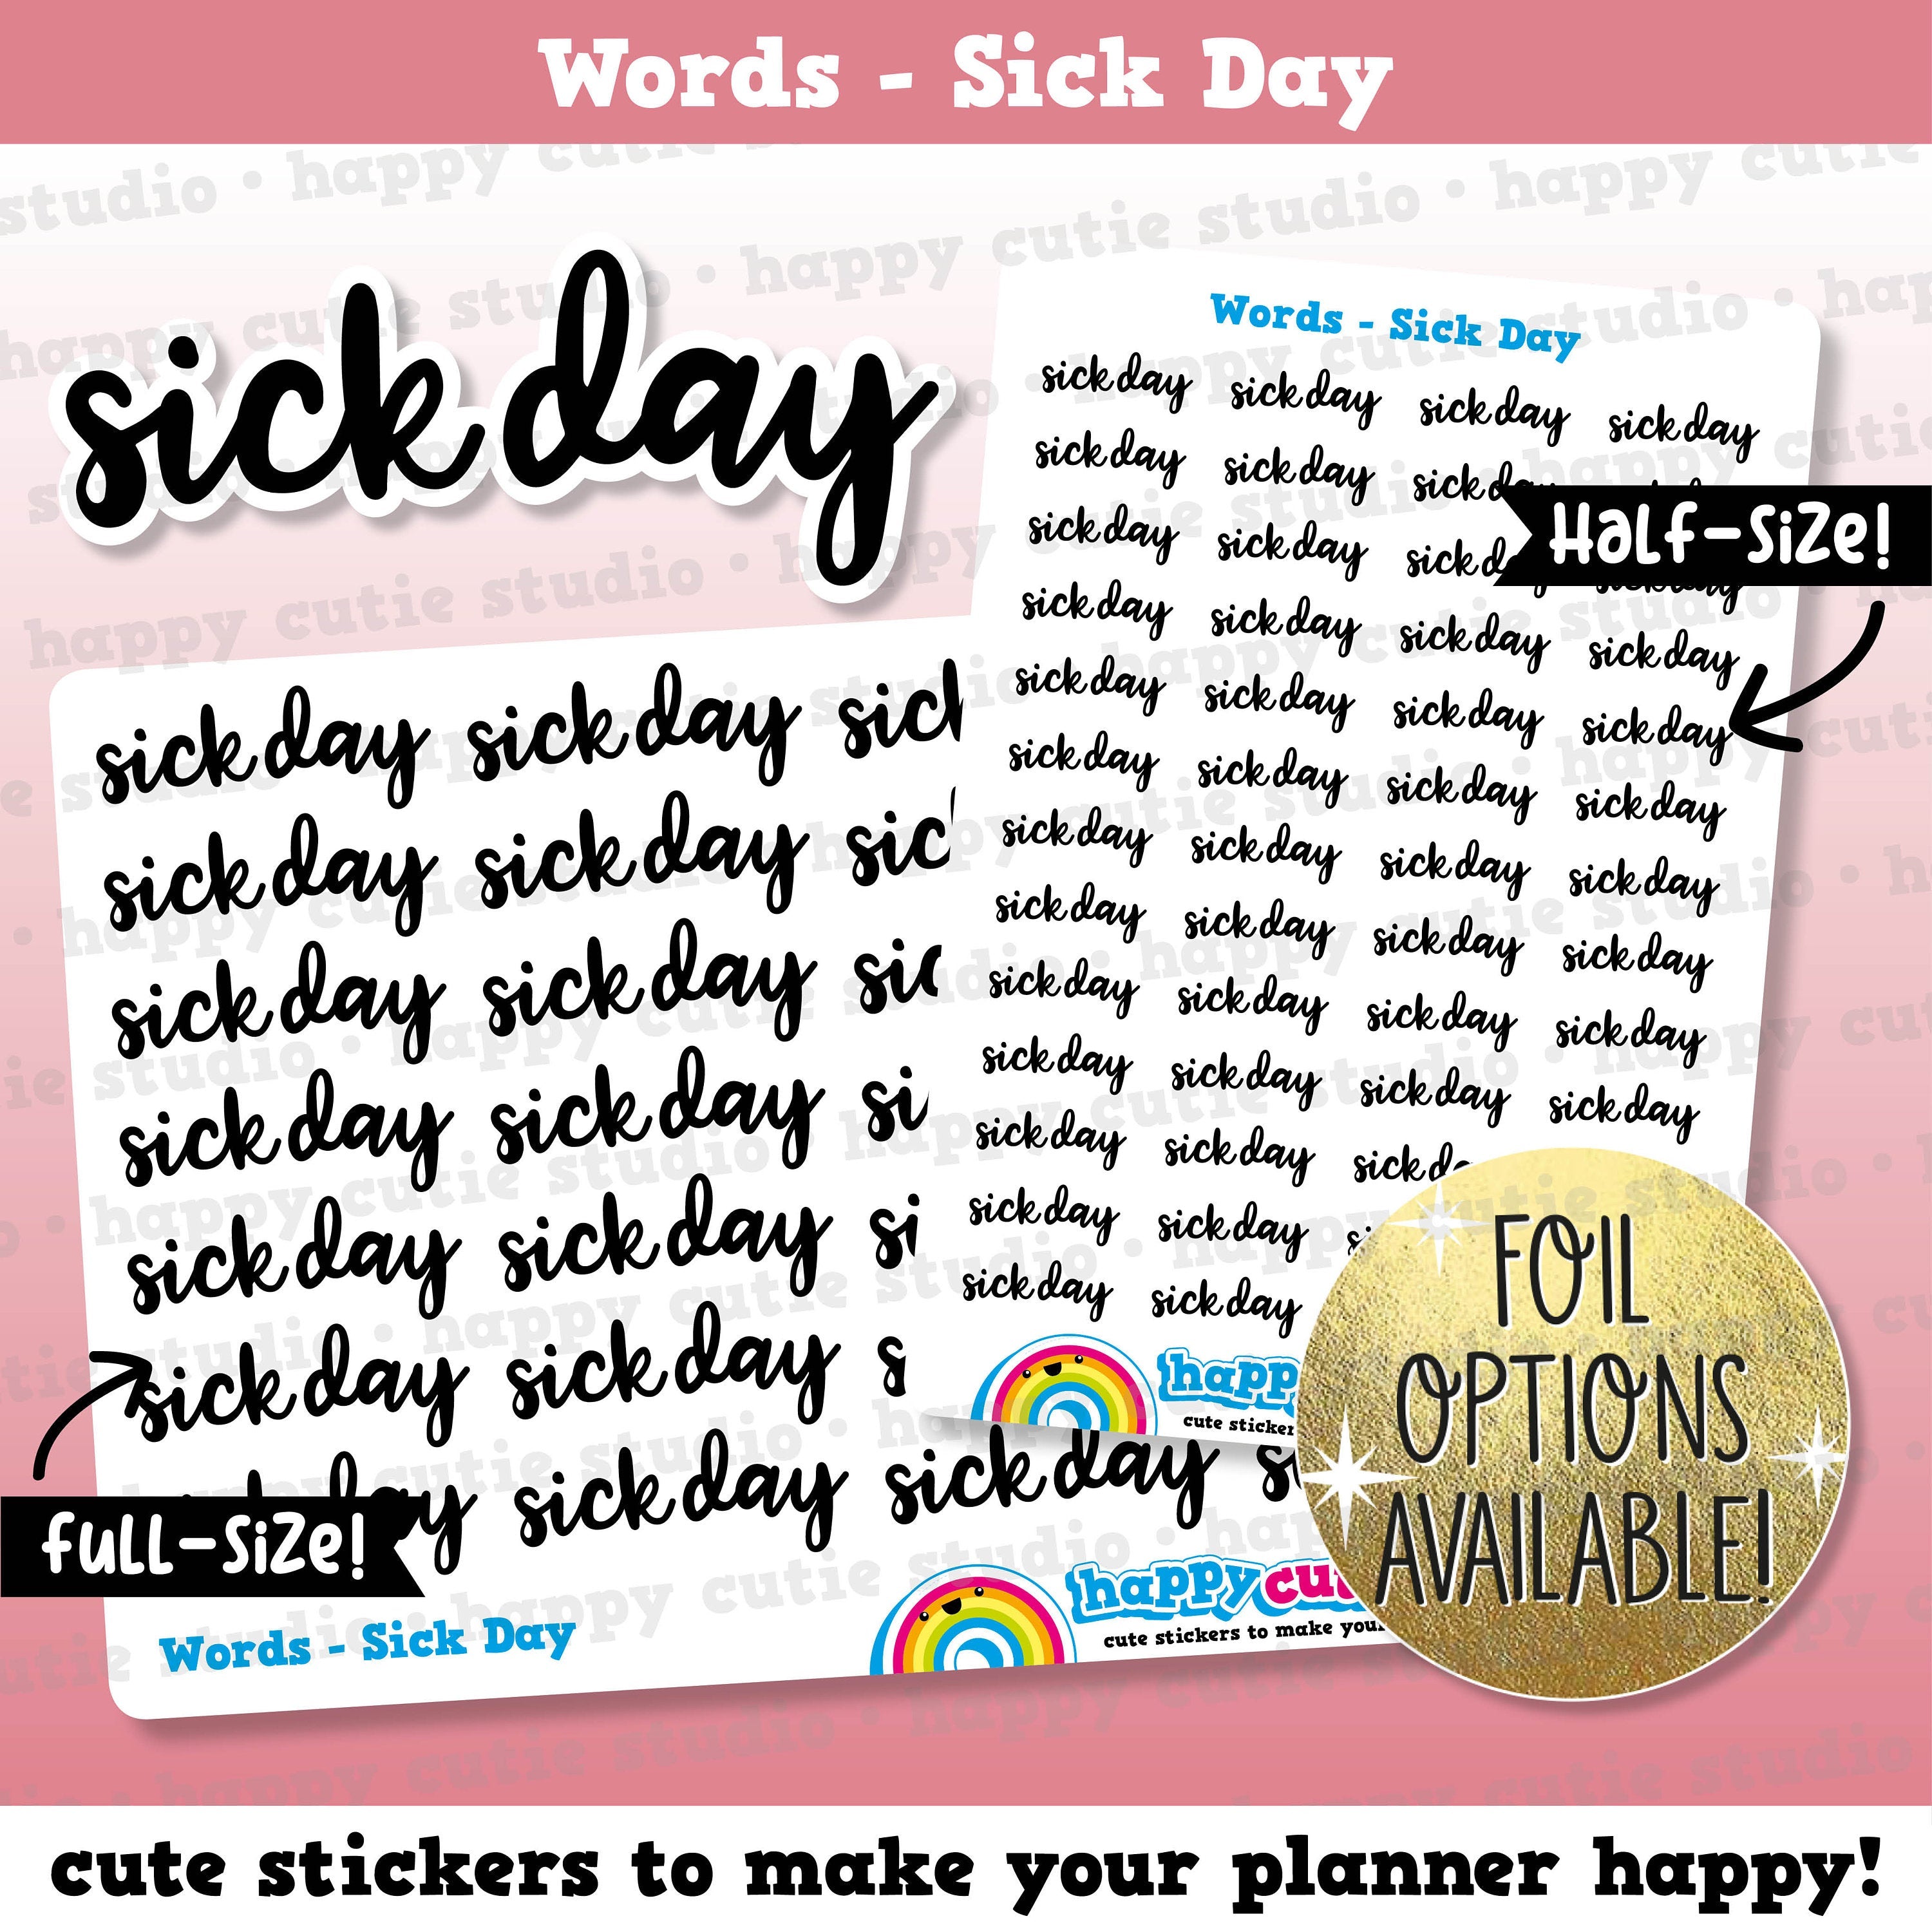 Sick Day Words/Functional/Foil Planner Stickers